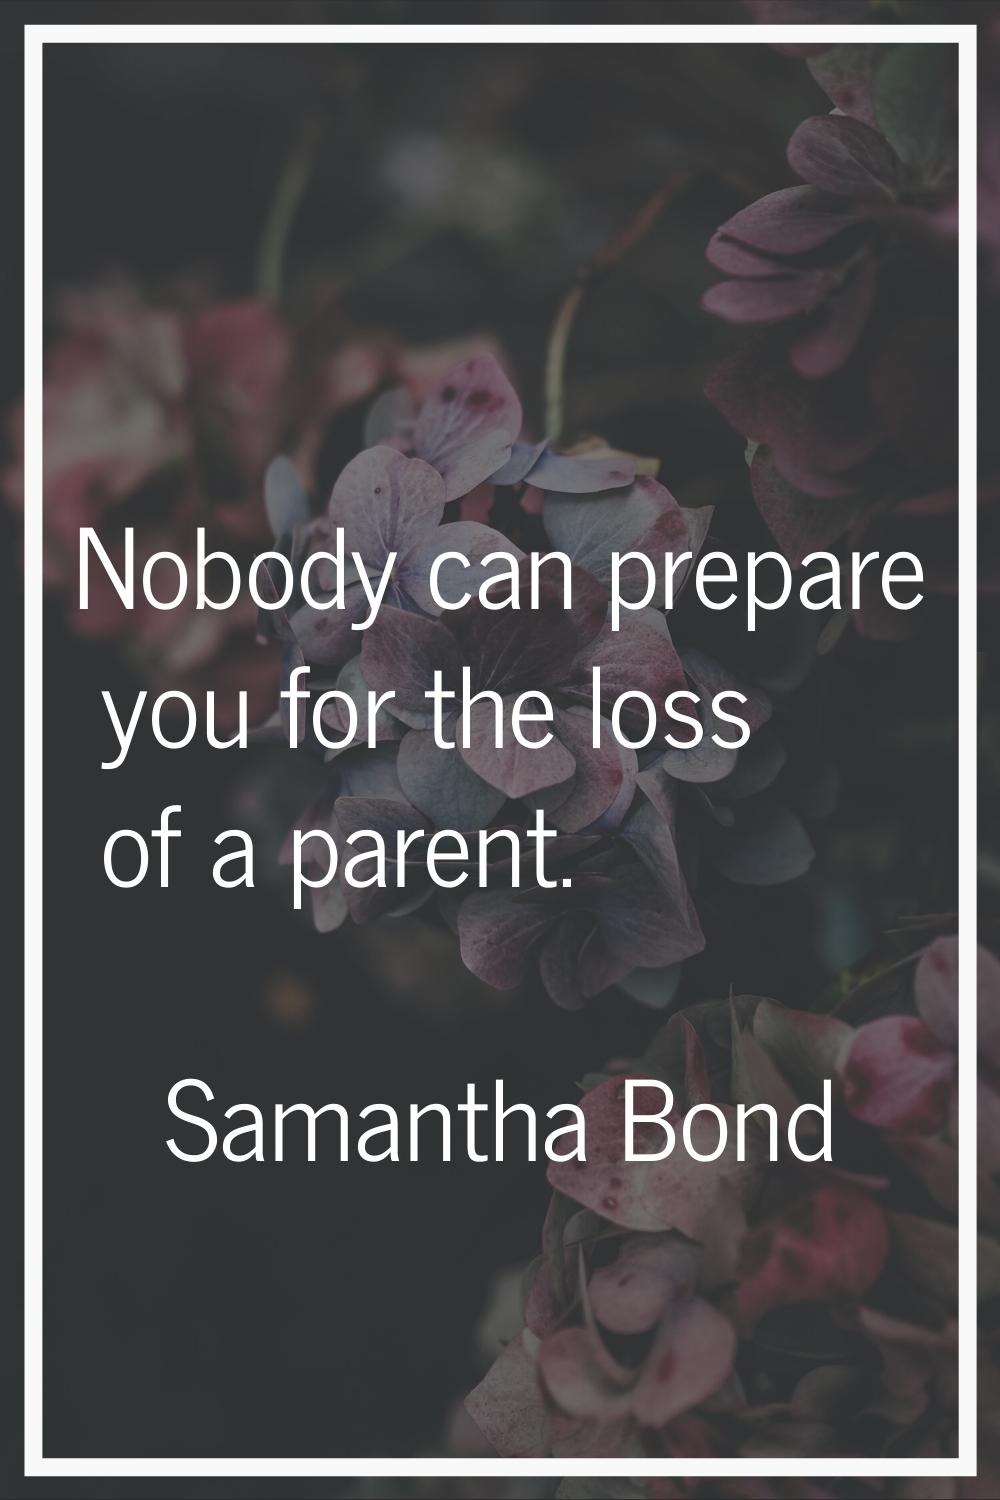 Nobody can prepare you for the loss of a parent.